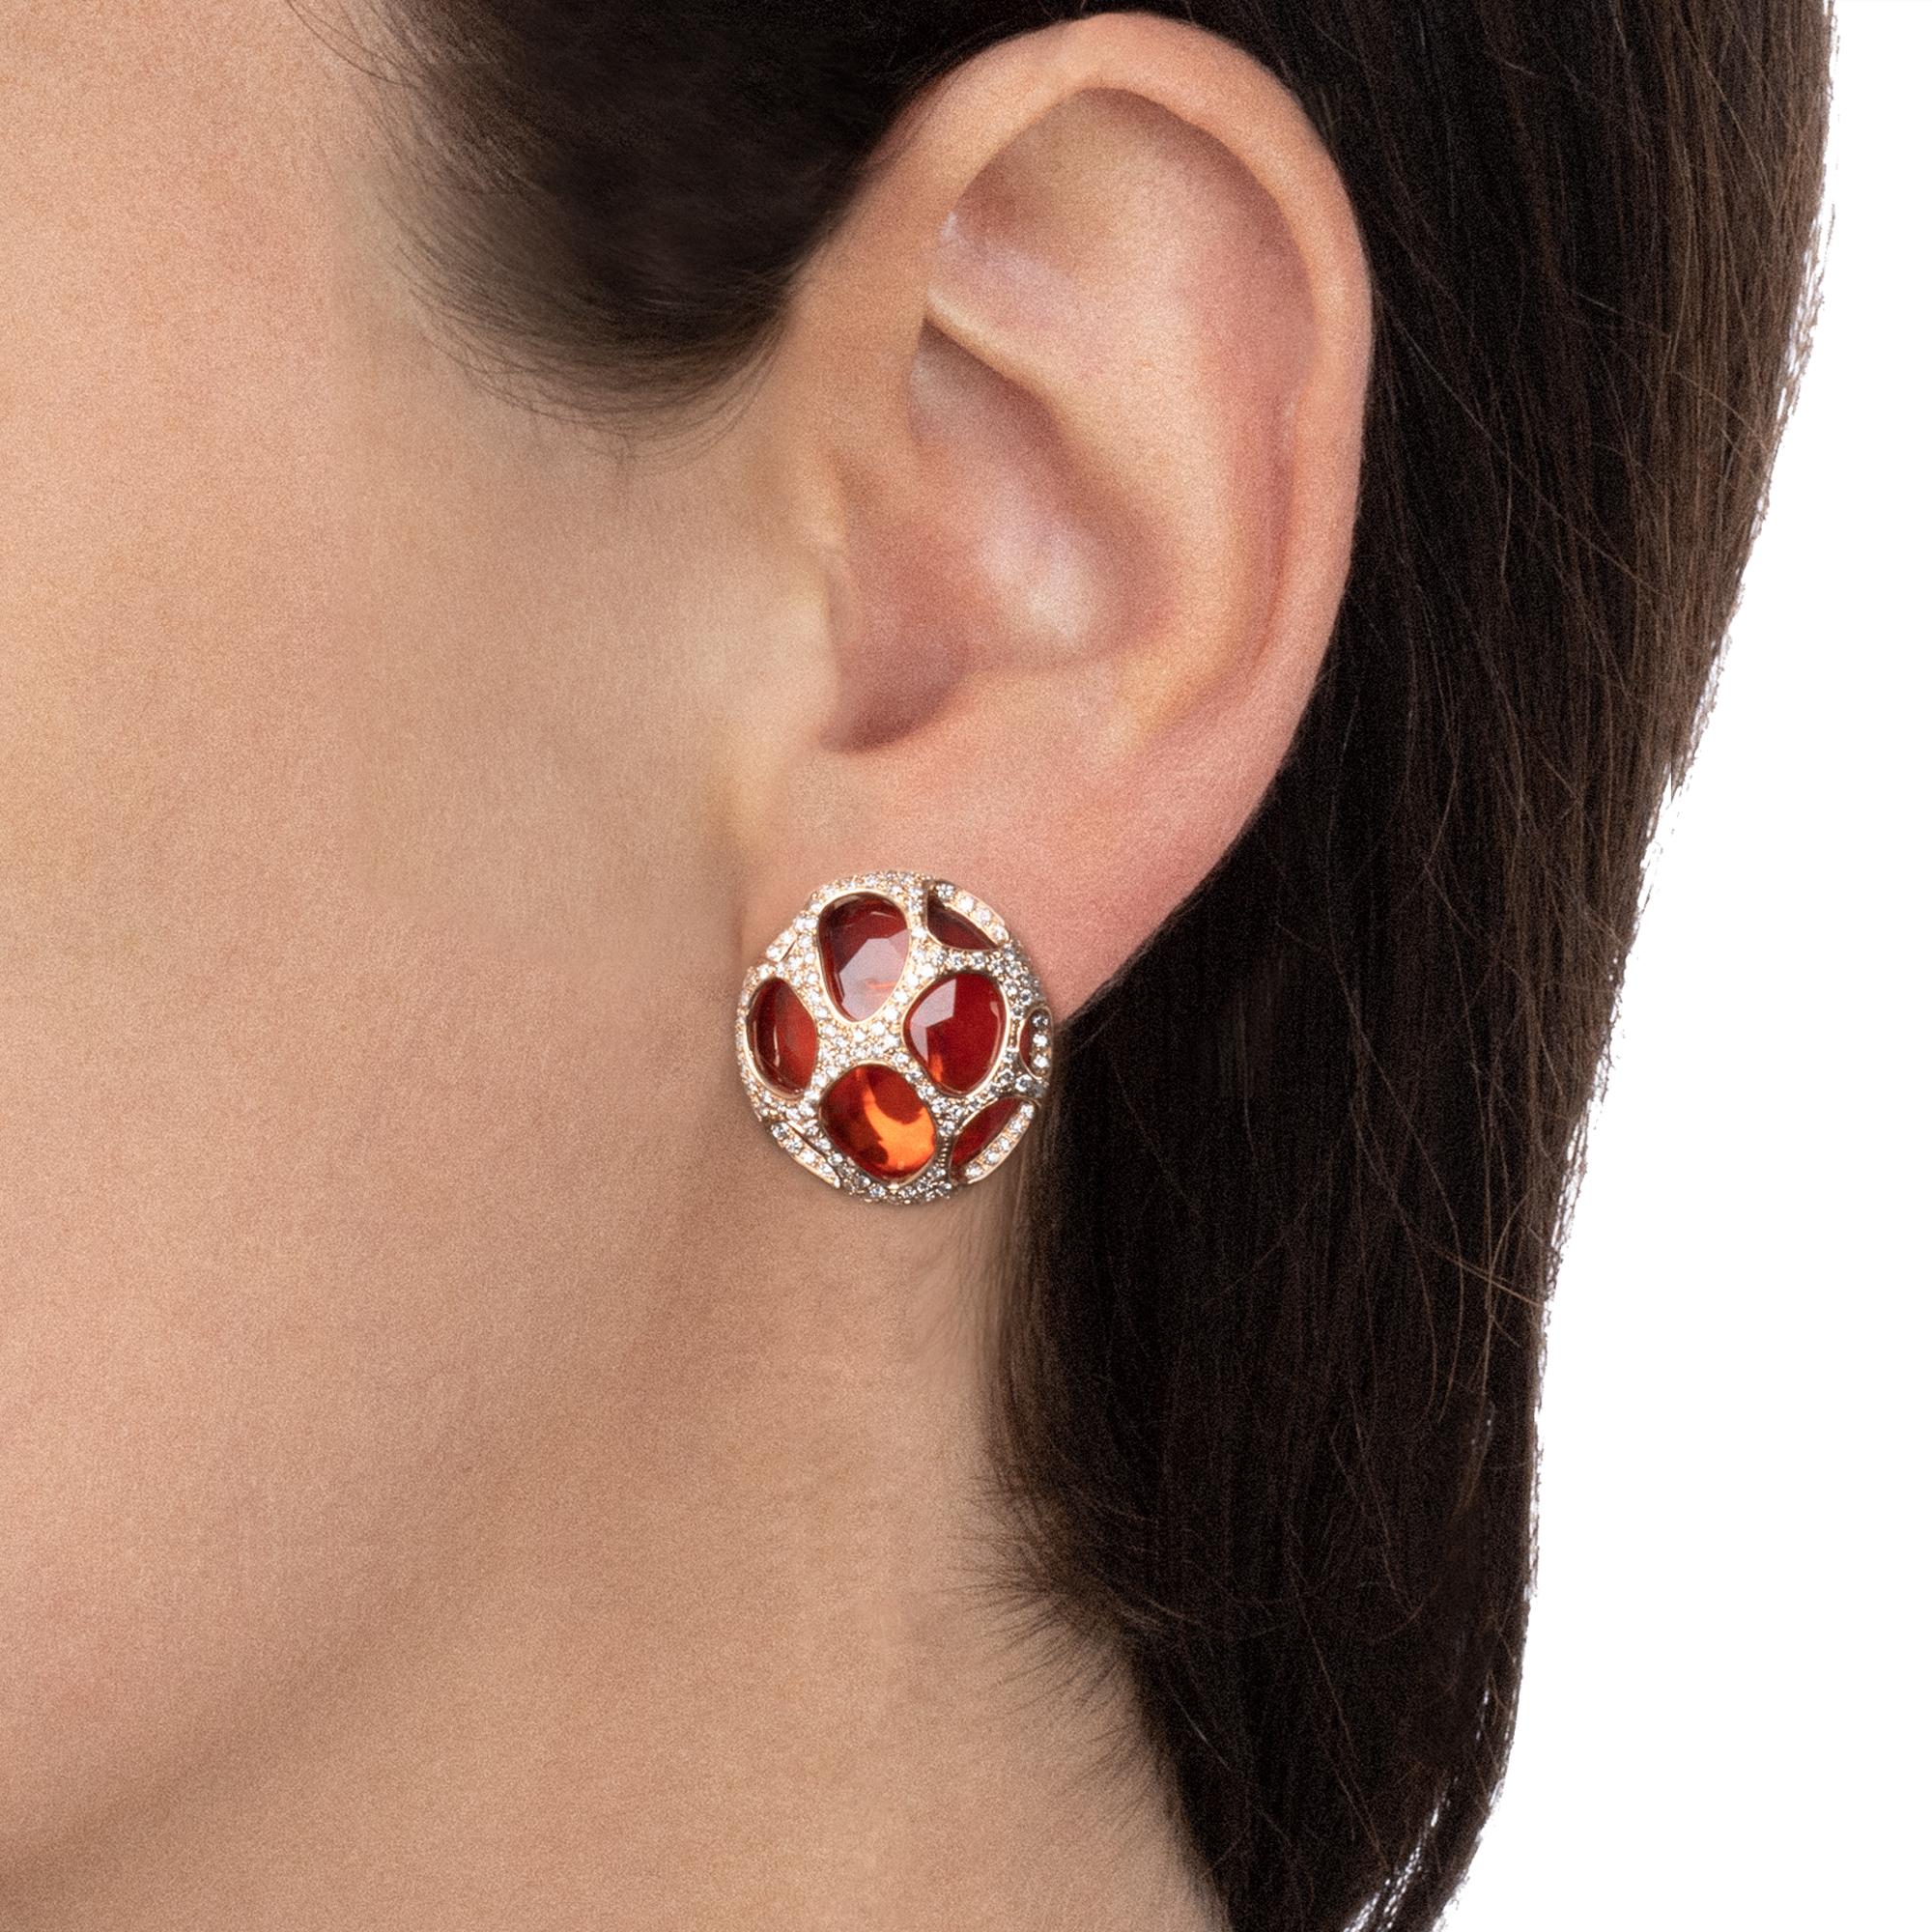 A playful, yet classy set of earrings that captures the fresh joy of a summer holiday. The vibrant red shade of the crystal is highlighted by the sparkling brightness of the small diamonds. The delightfully elegant rose gold decoration makes this